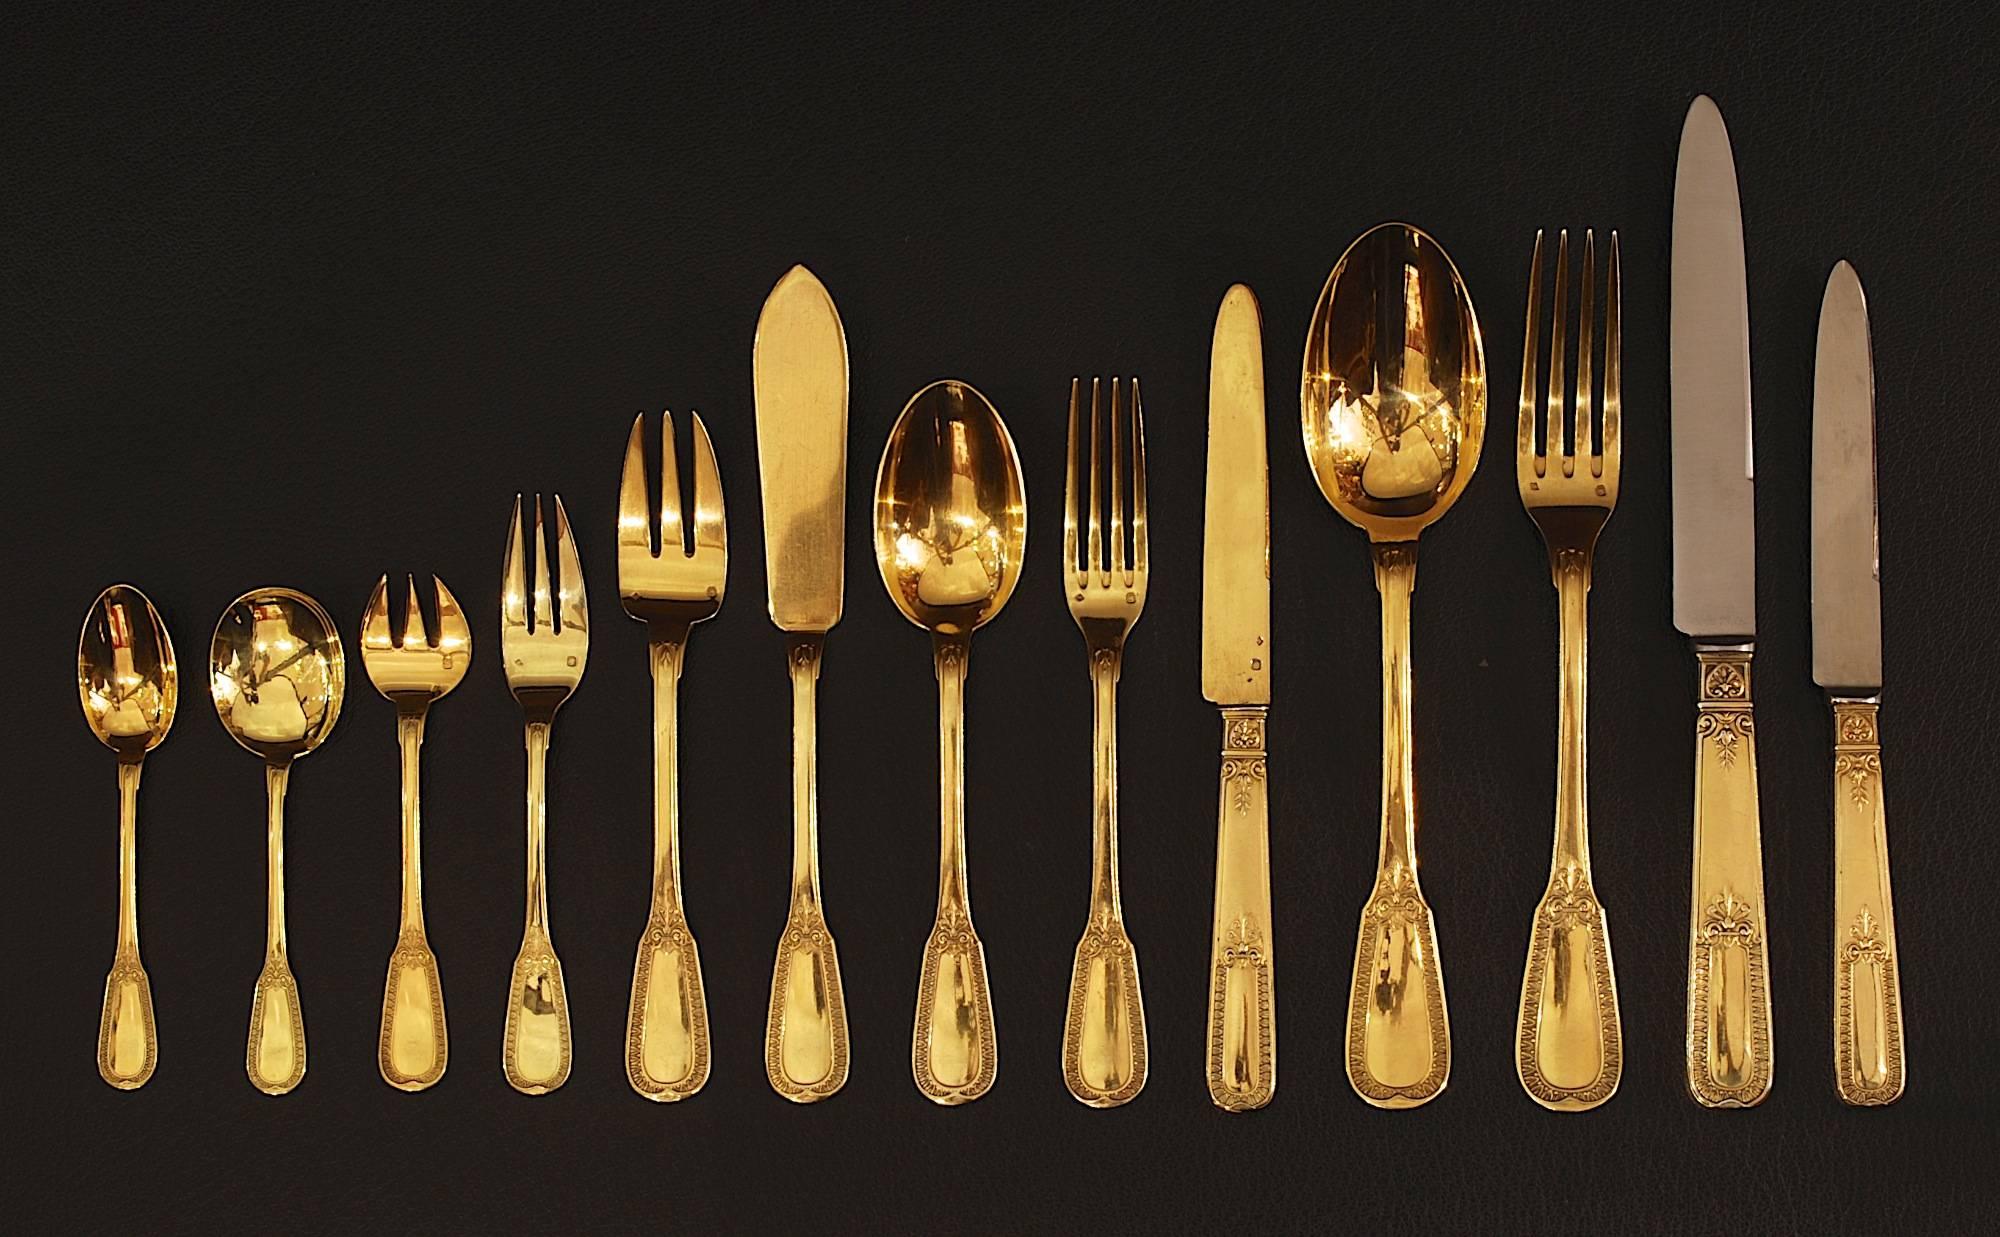 A French Silver-gilt 340-piece flatware service in the Empire style. By Tetard Freres, Paris, circa 1950.

Total 340 pieces. In a fully fitted canteen box

Silver weight 507oz (15792g)

Comprising:

24 table forks
24 table spoons
24 table